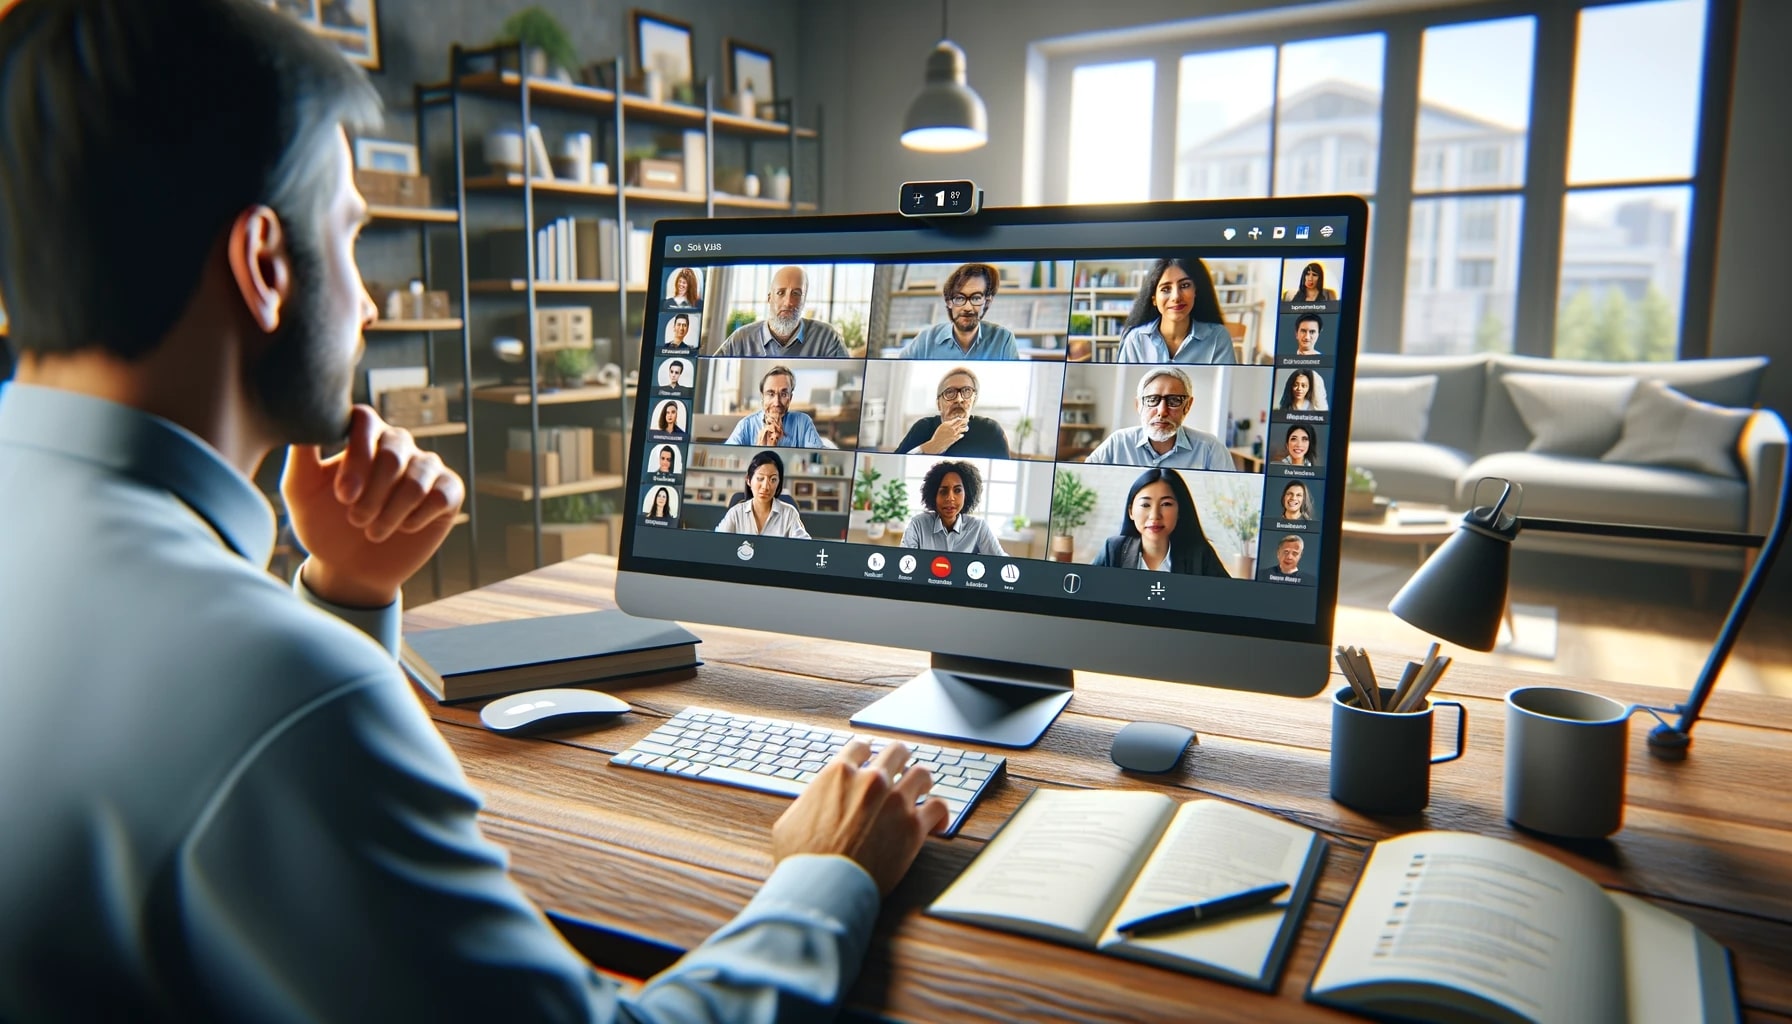 The image depicting a virtual meeting with diverse participants on a video conference call